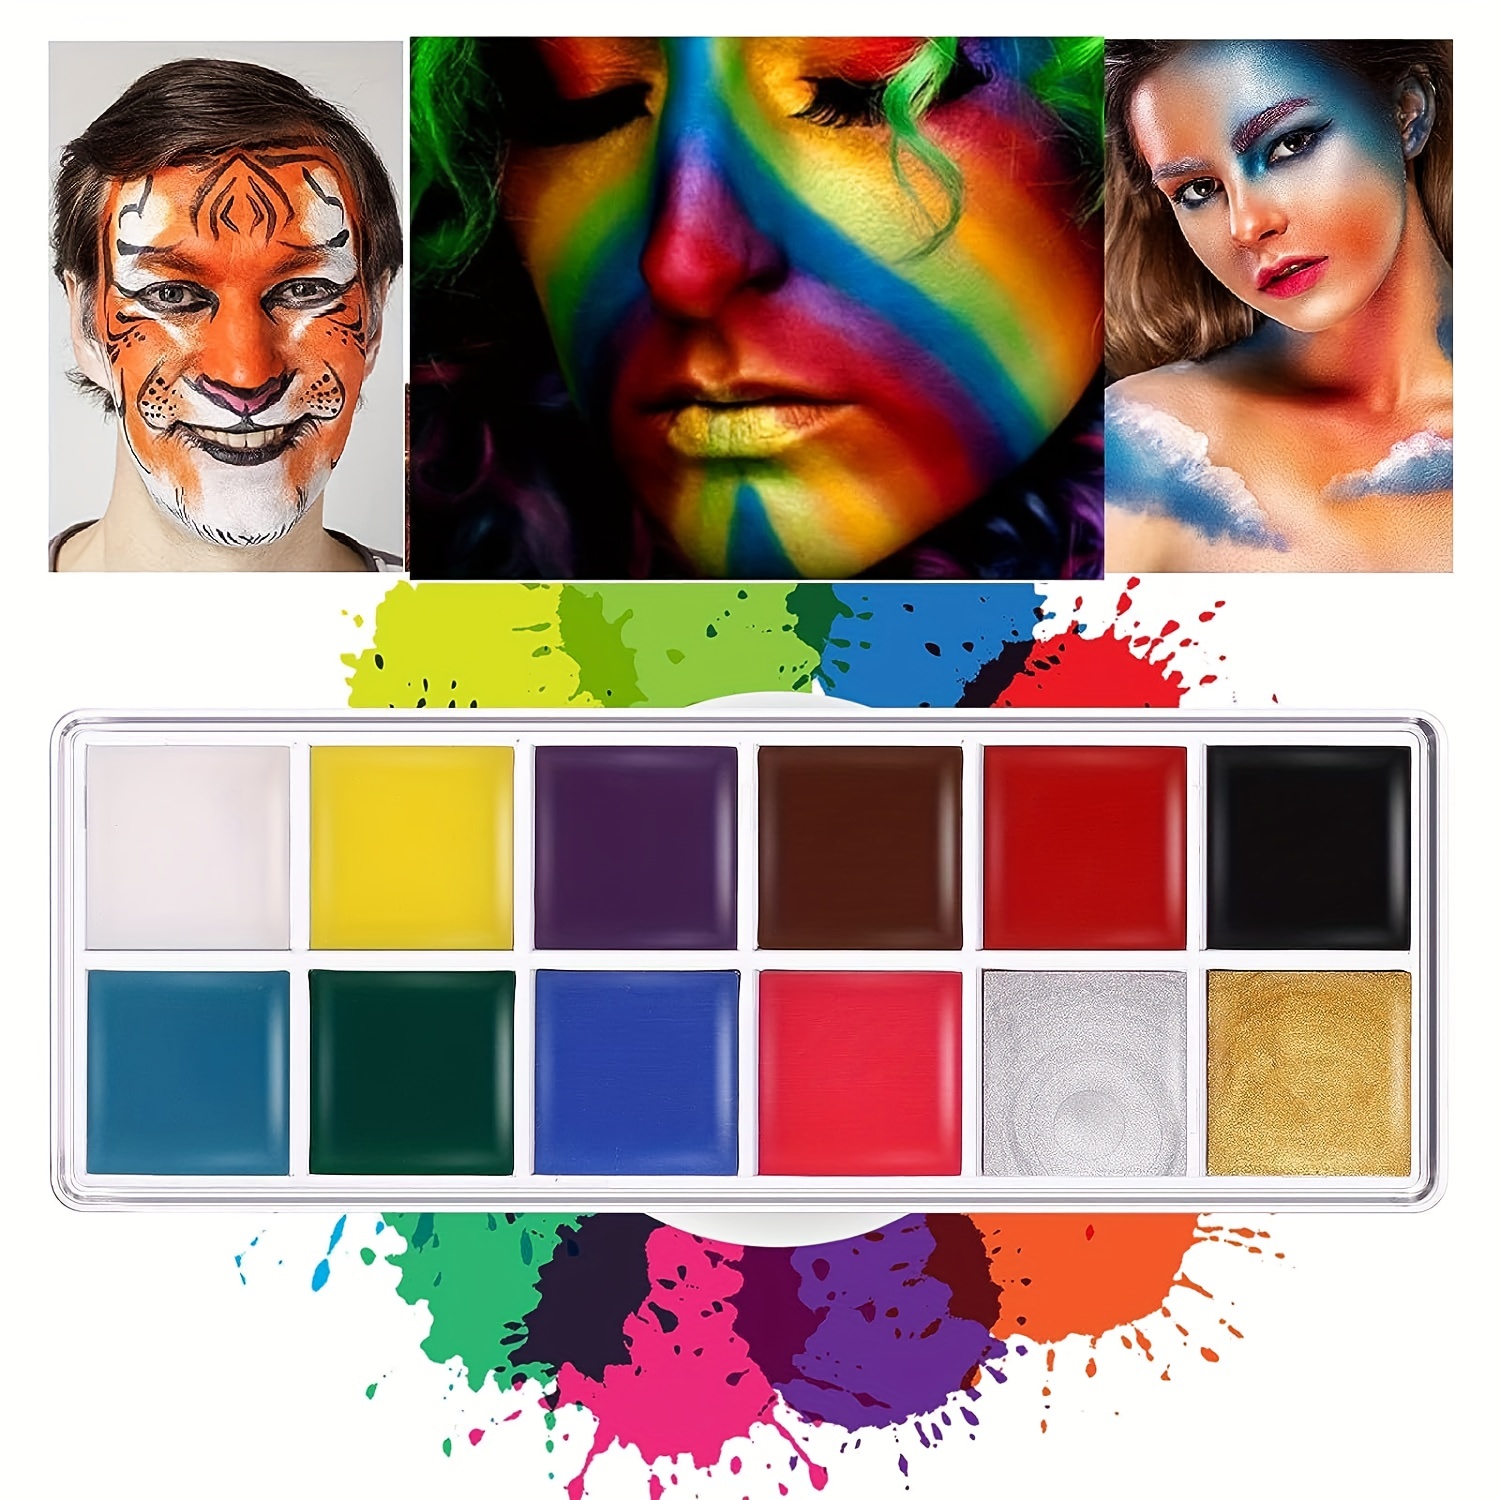  Wismee Face Body Paint Makeup Palette Professional 12 Colors  Face Paint Kit Body Art Party Fancy Make Up with 10 Brushes Cosplay Makeup  Set for Halloween Christmas : Arts, Crafts & Sewing